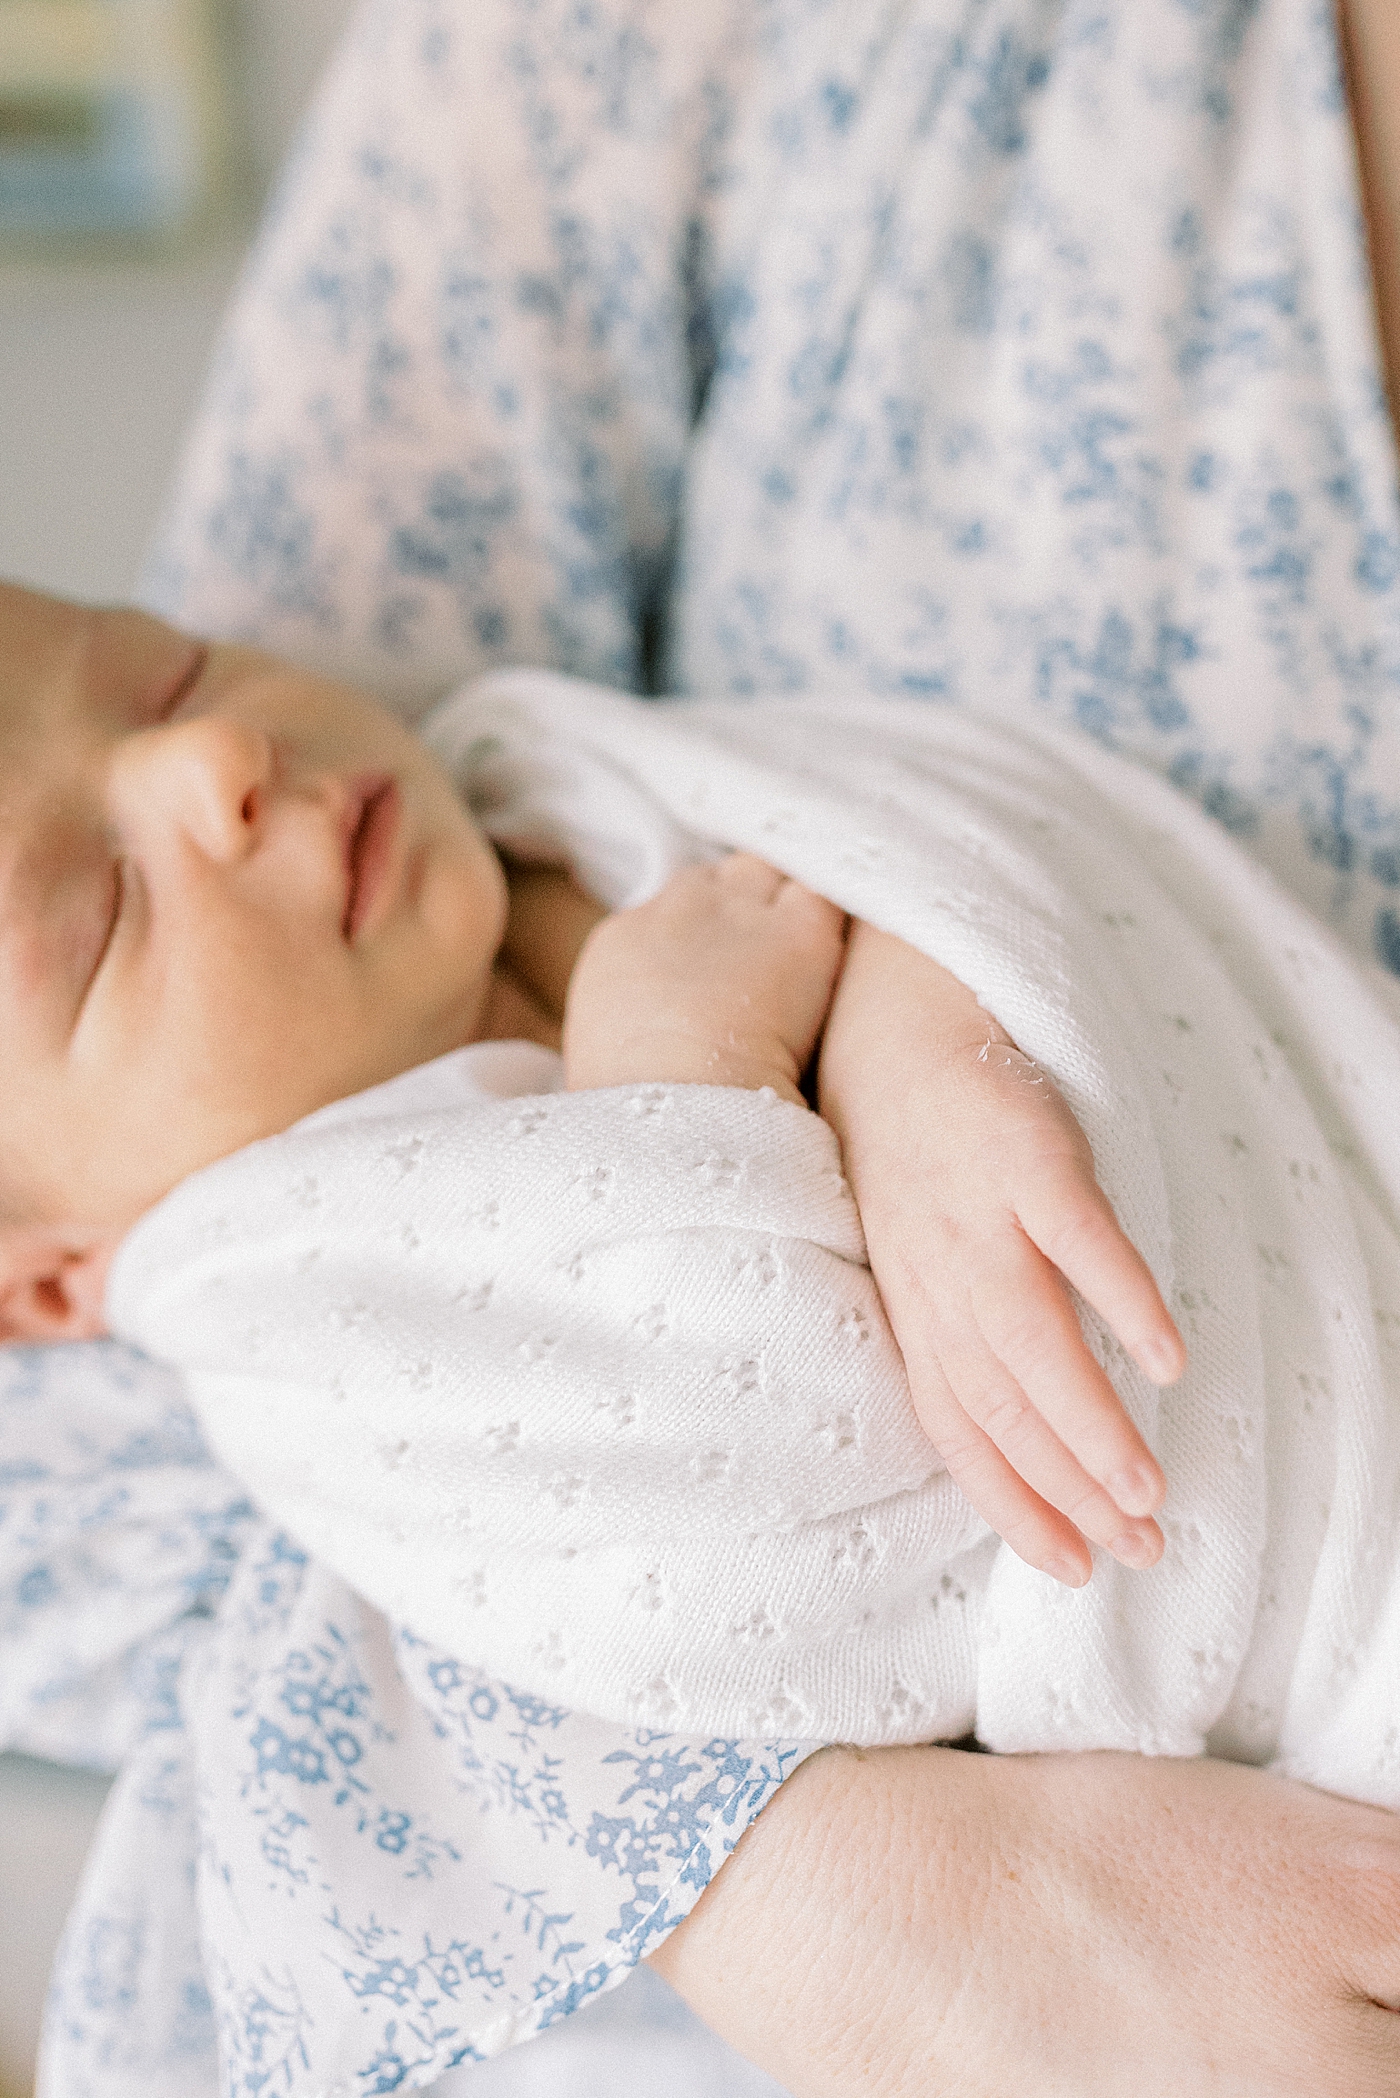 Newborn wrapped in a white swaddle | Photo by Mount Pleasant Newborn Photographer Caitlyn Motycka